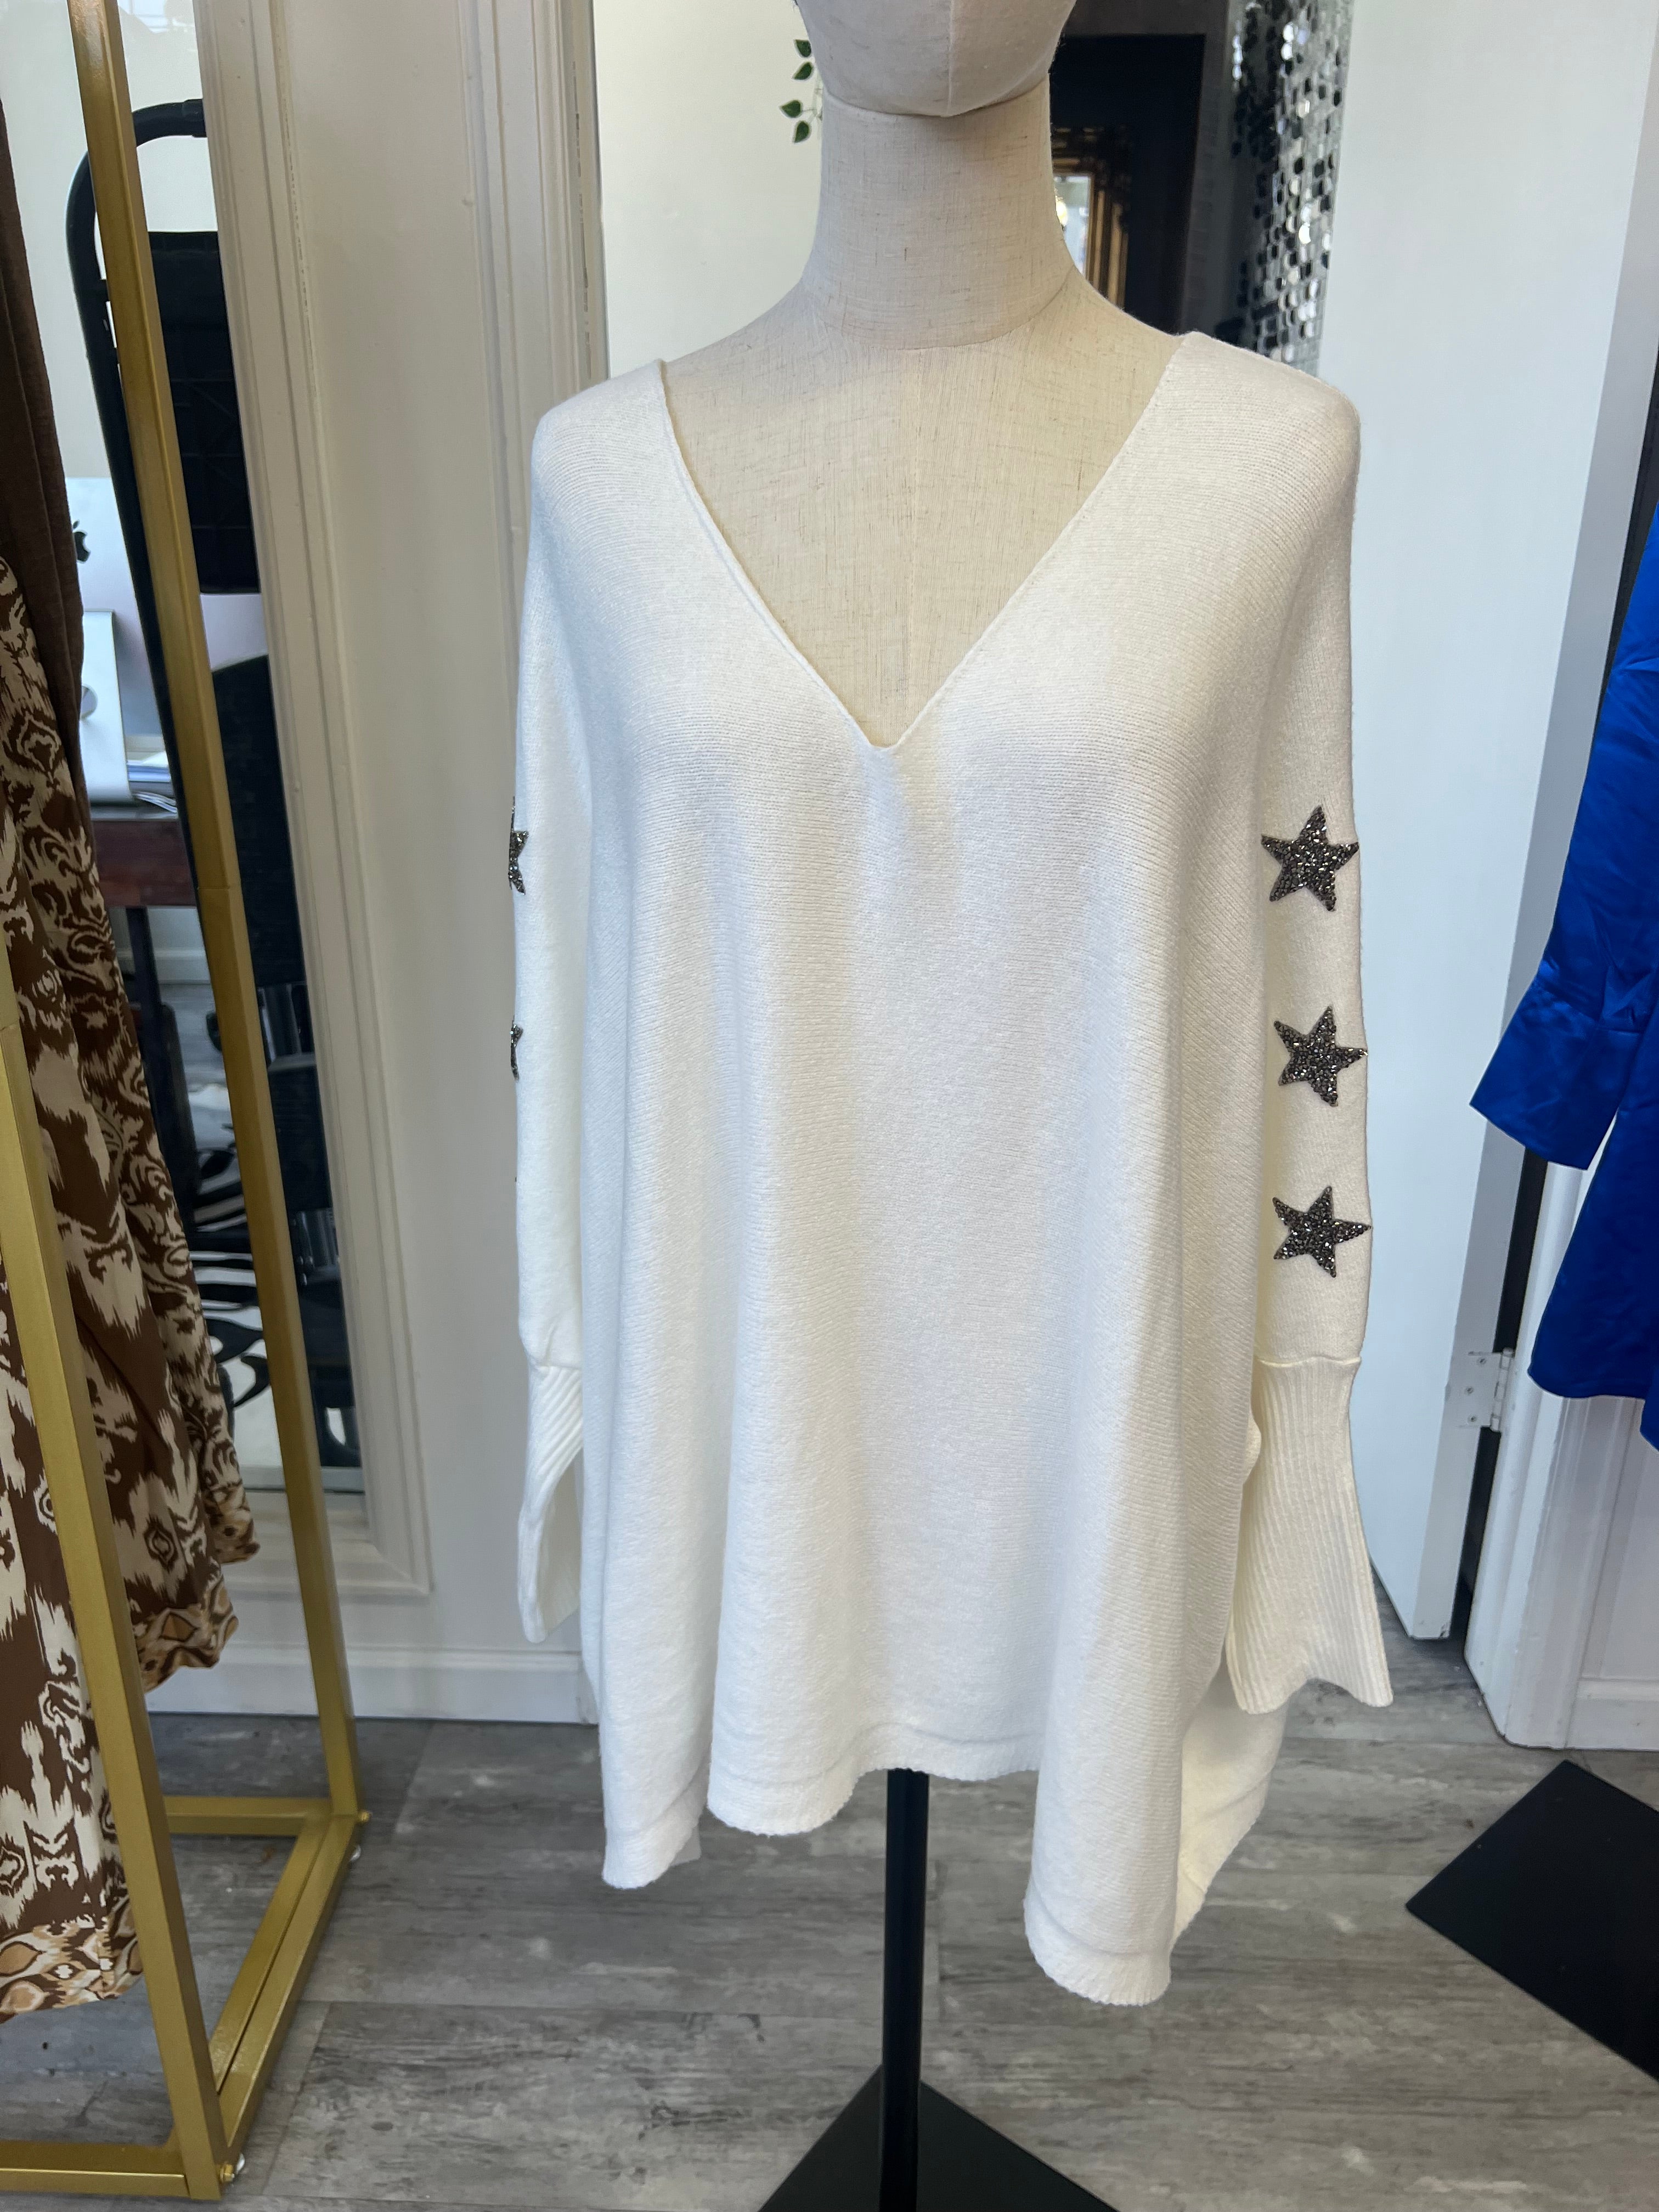 SCANDAL ITALY OLIVIA SWEATER IN CREAM